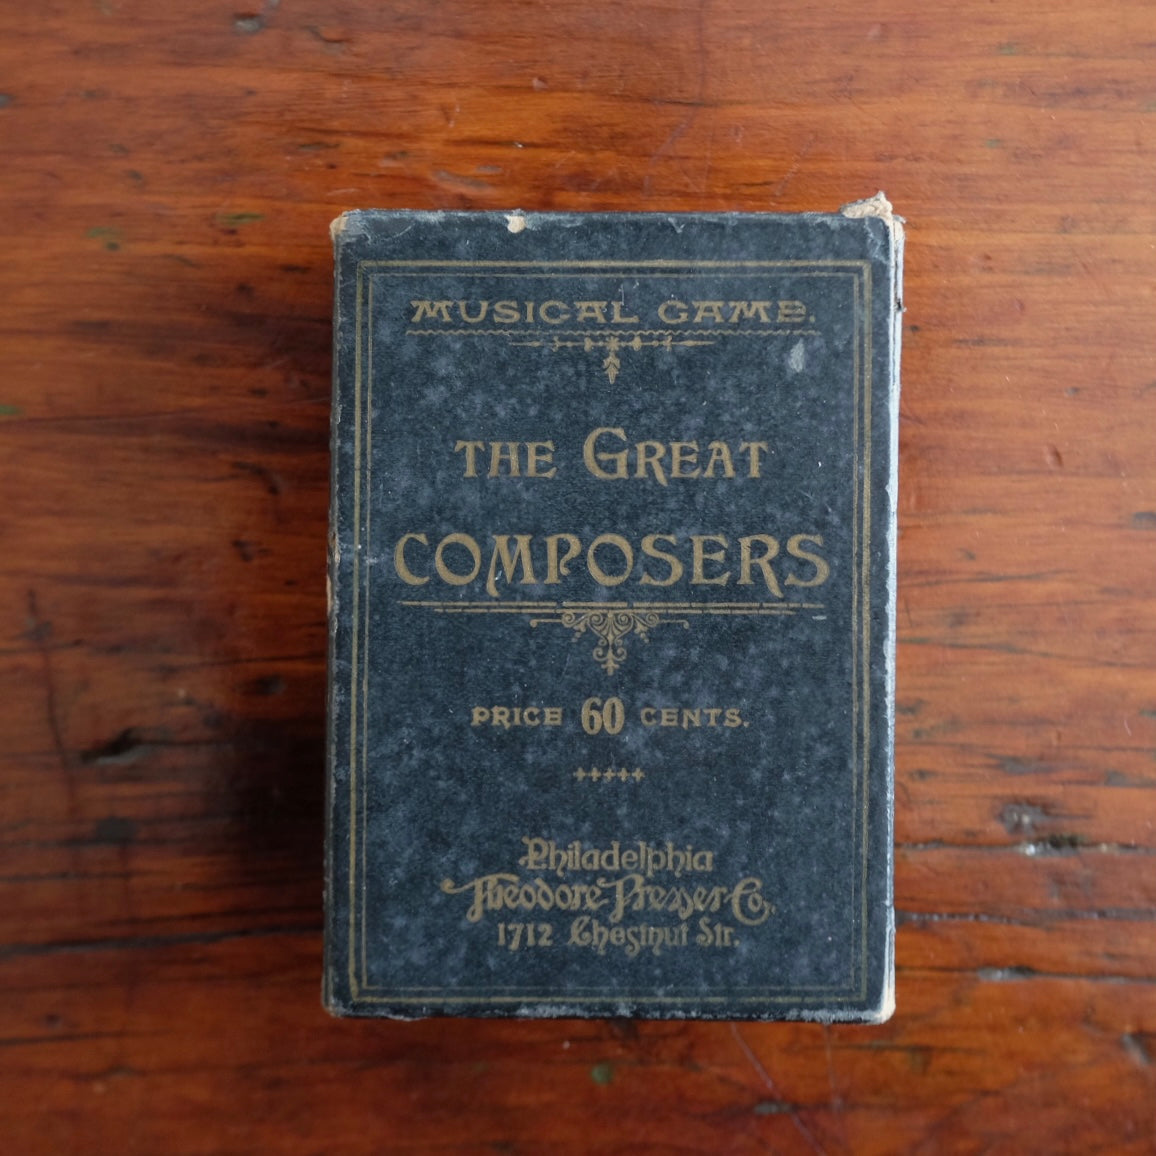 The Great Composers Card Game c. 1912